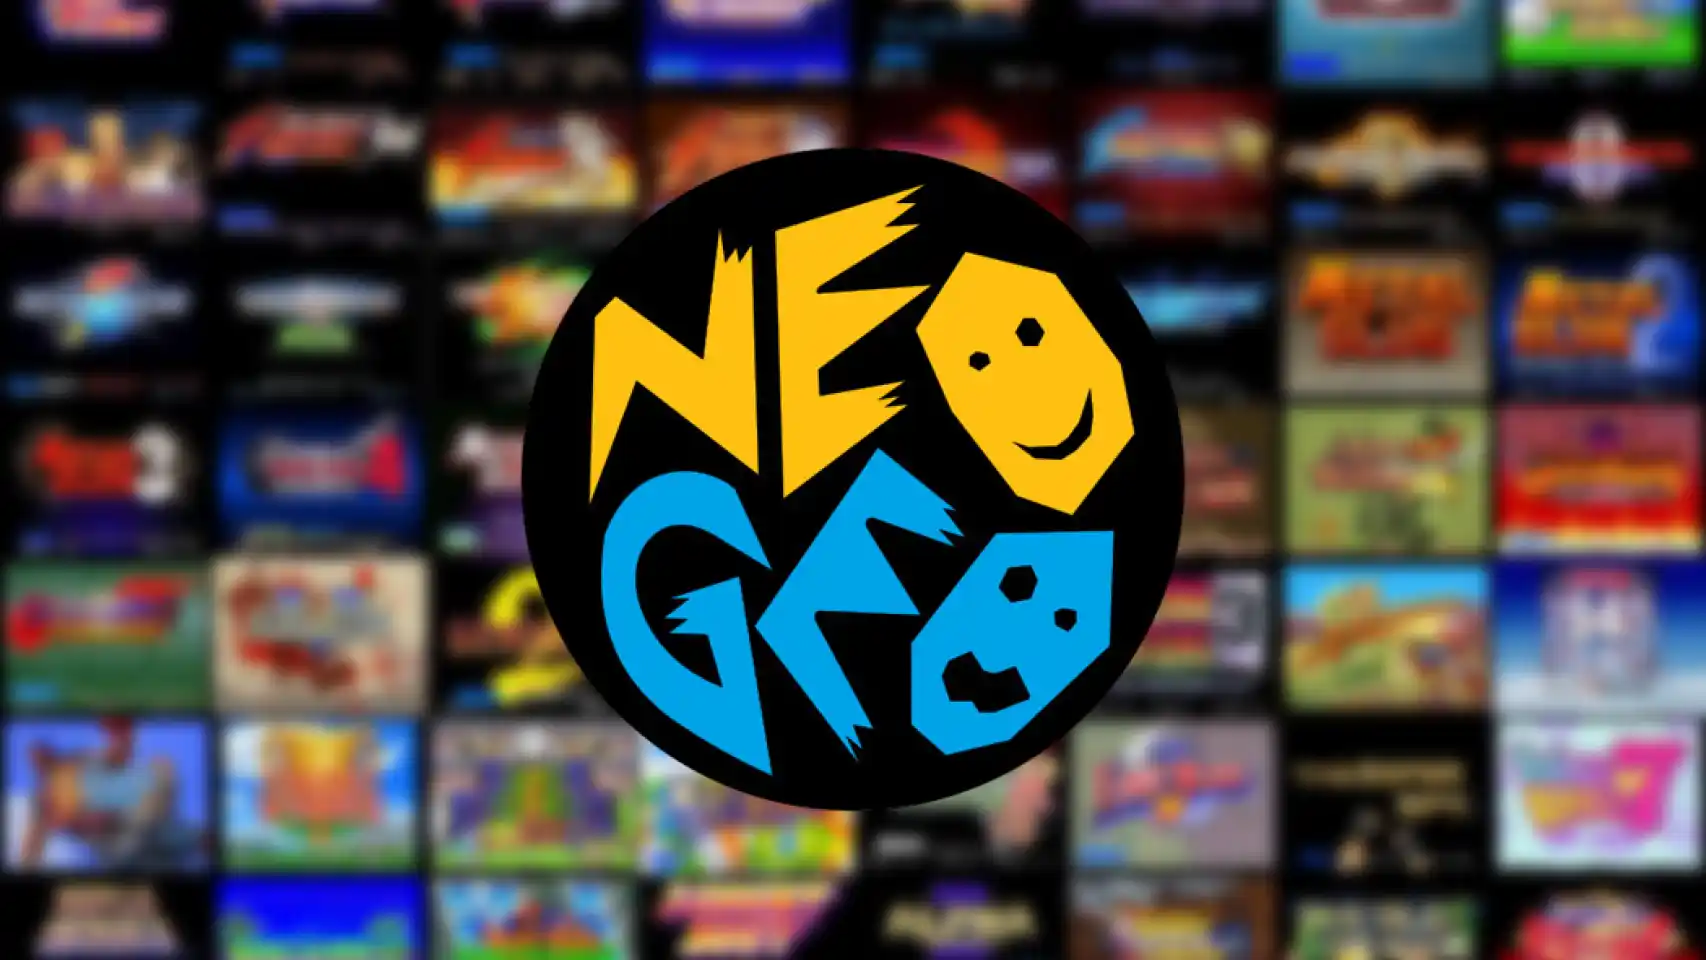 neo-geo-emulator-for-android-the-complete-guide